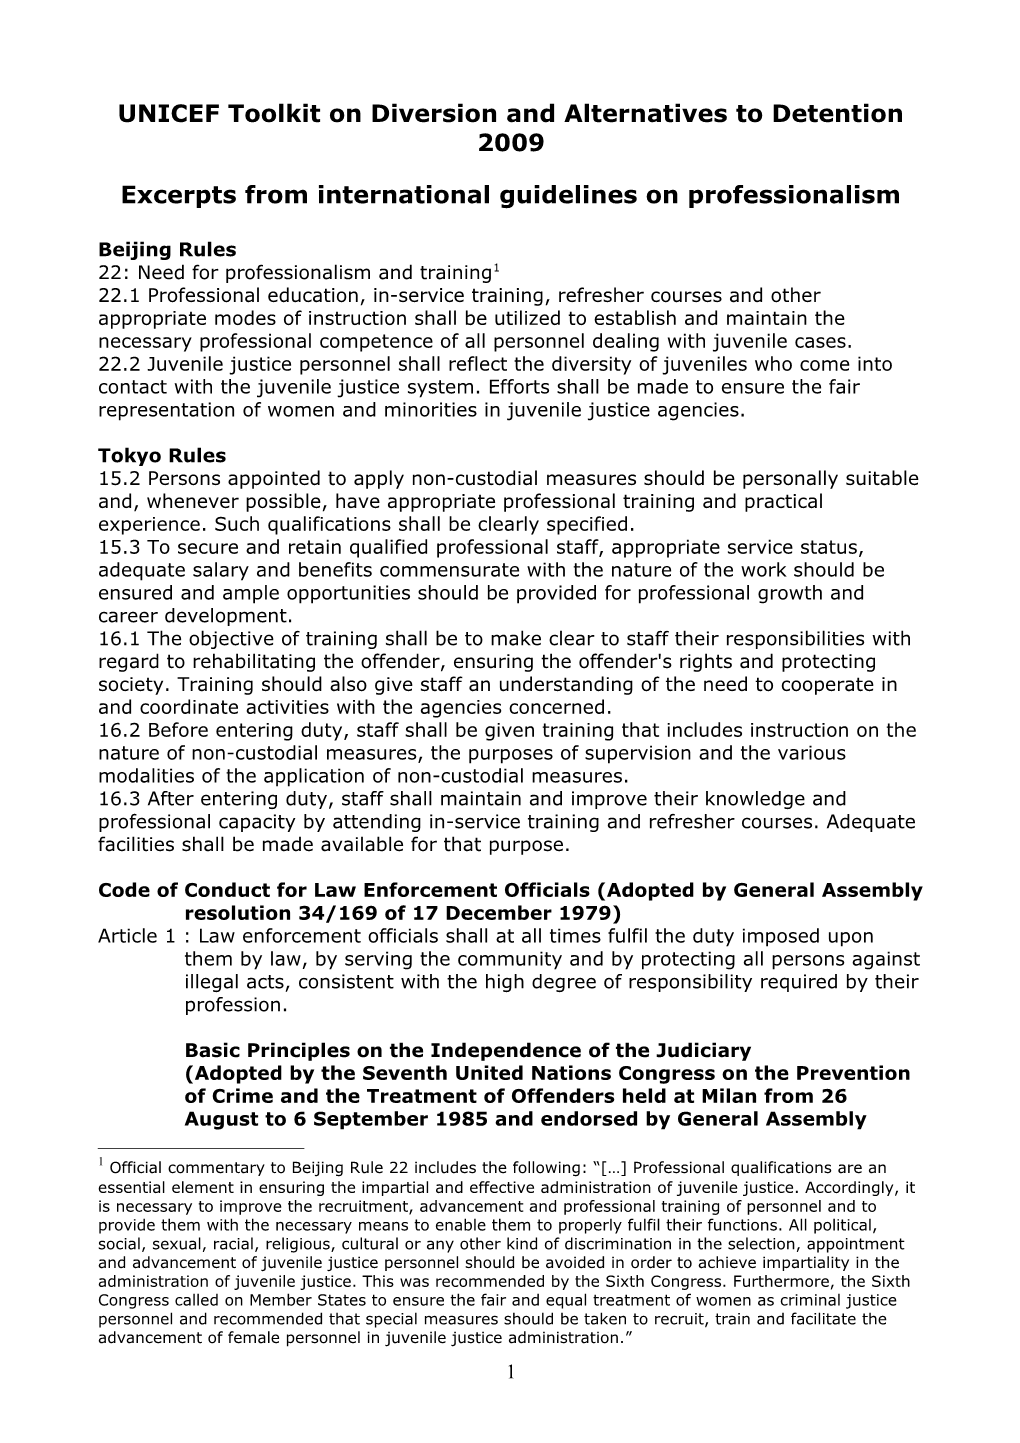 Code of Conduct for Law Enforcement Officials (Adopted by General Assembly Resolution 34/169